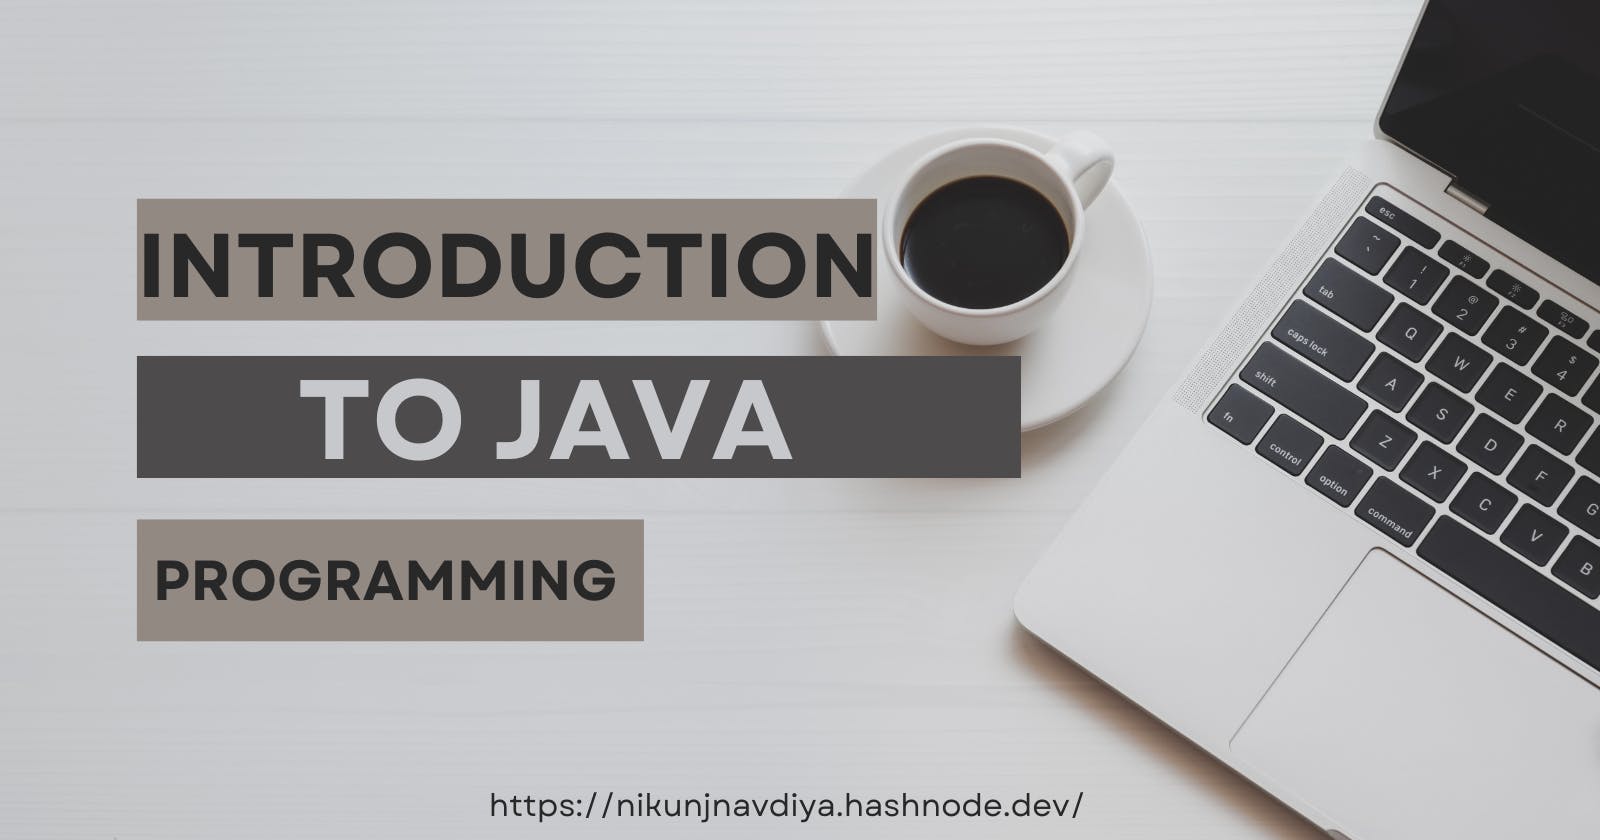 Introduction to java